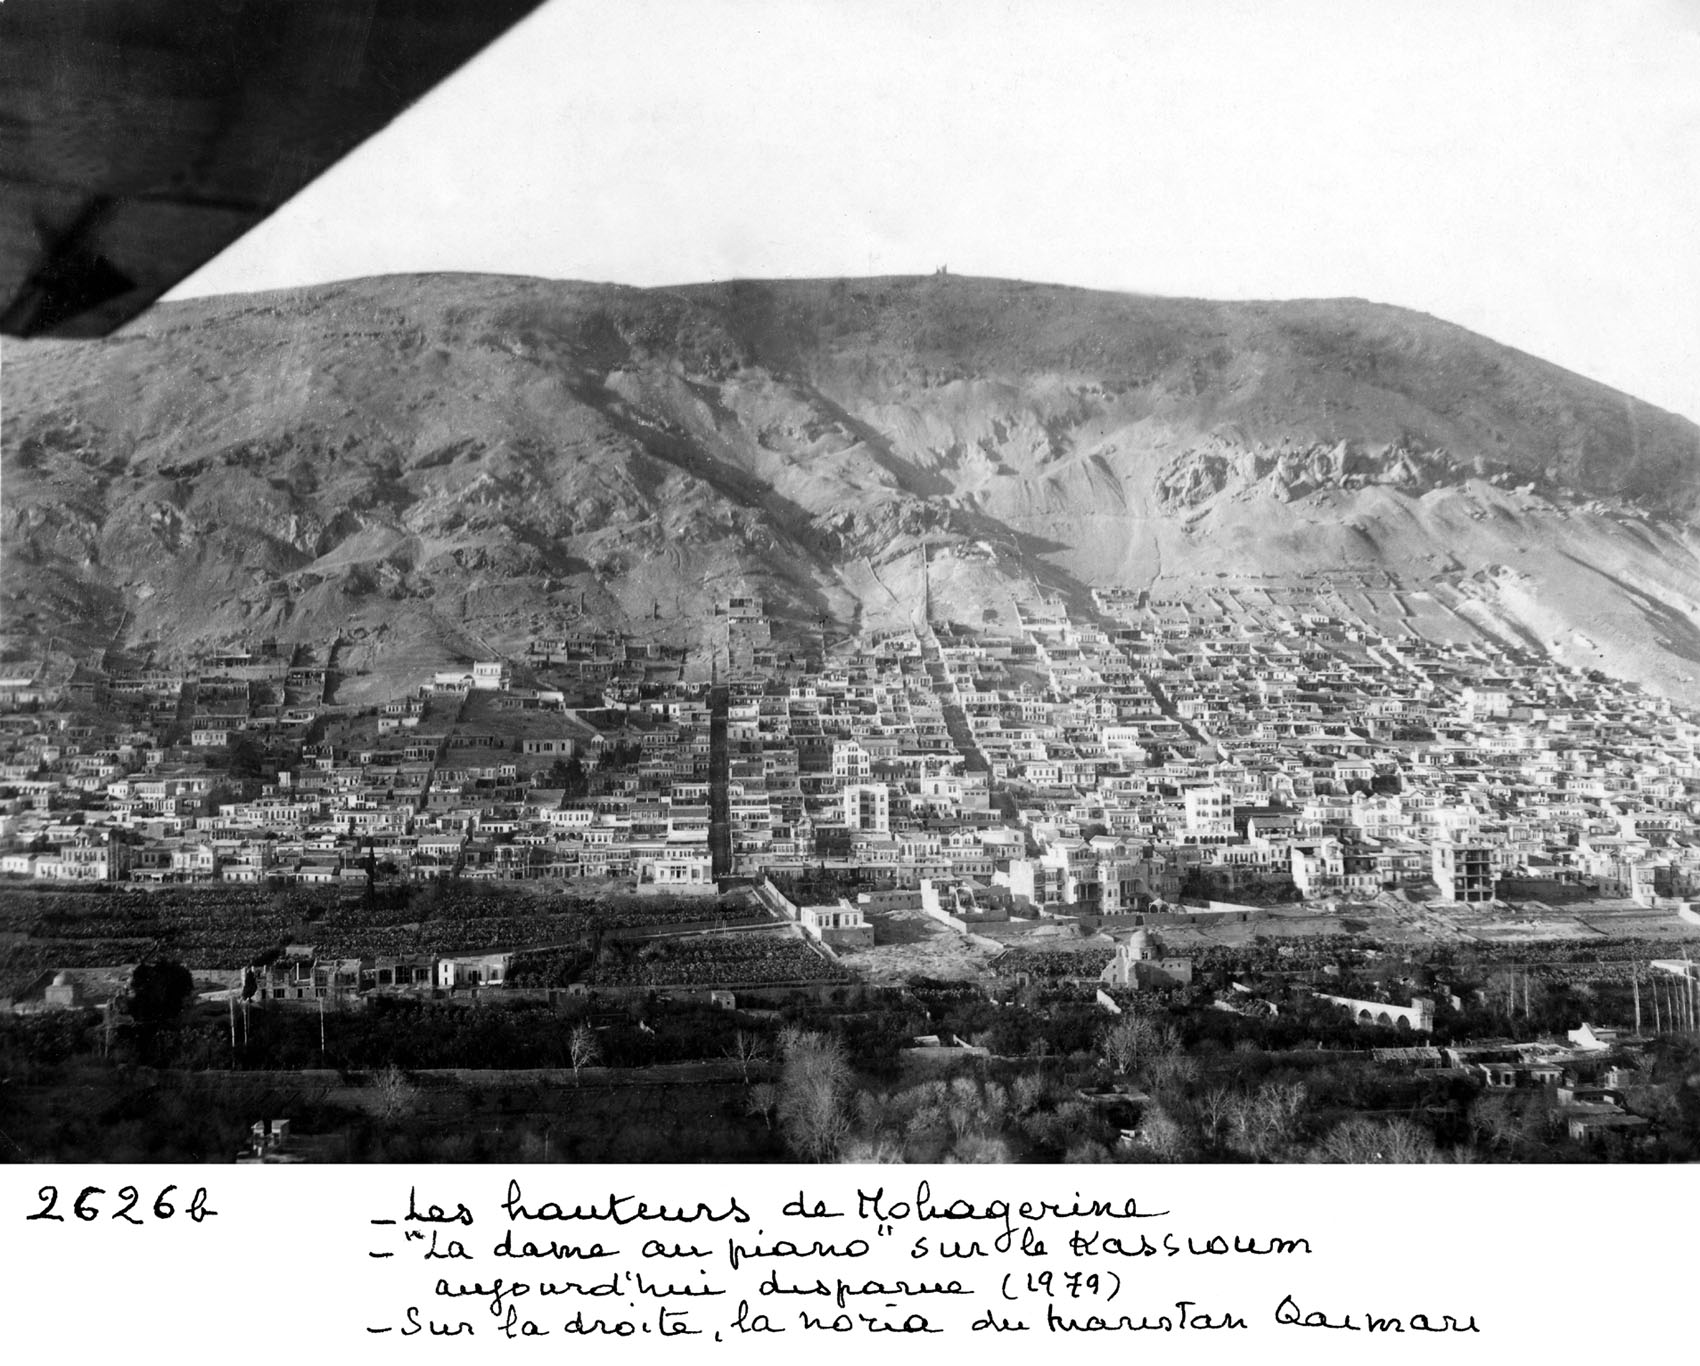 View of the heights of Mohagerine viewed from an airplane, Mount Qaisoun